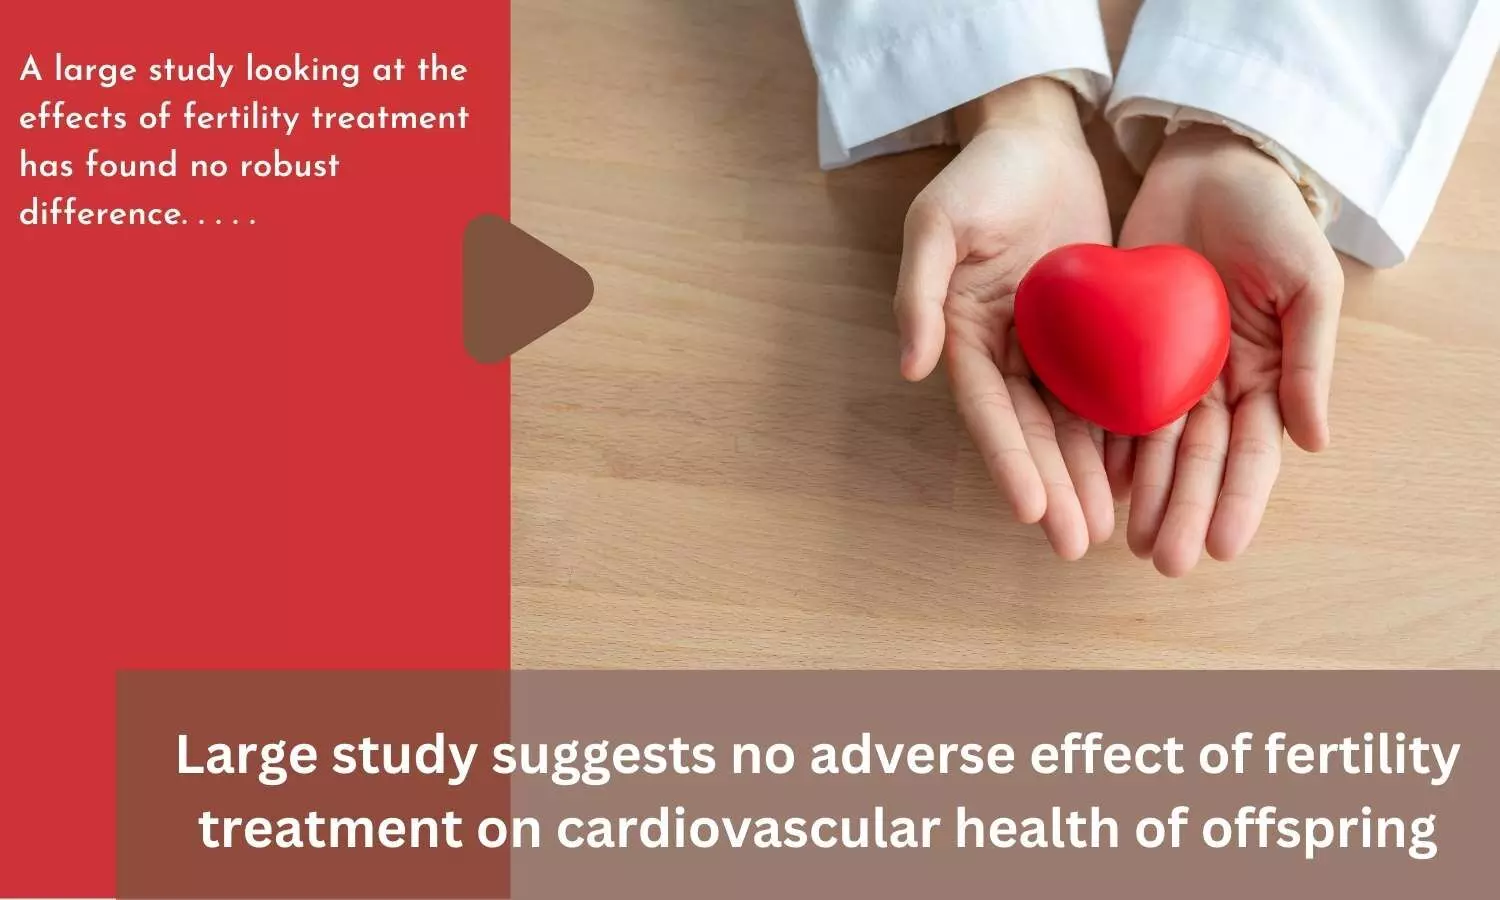 Large study suggests no adverse effect of fertility treatment on cardiovascular health of offspring